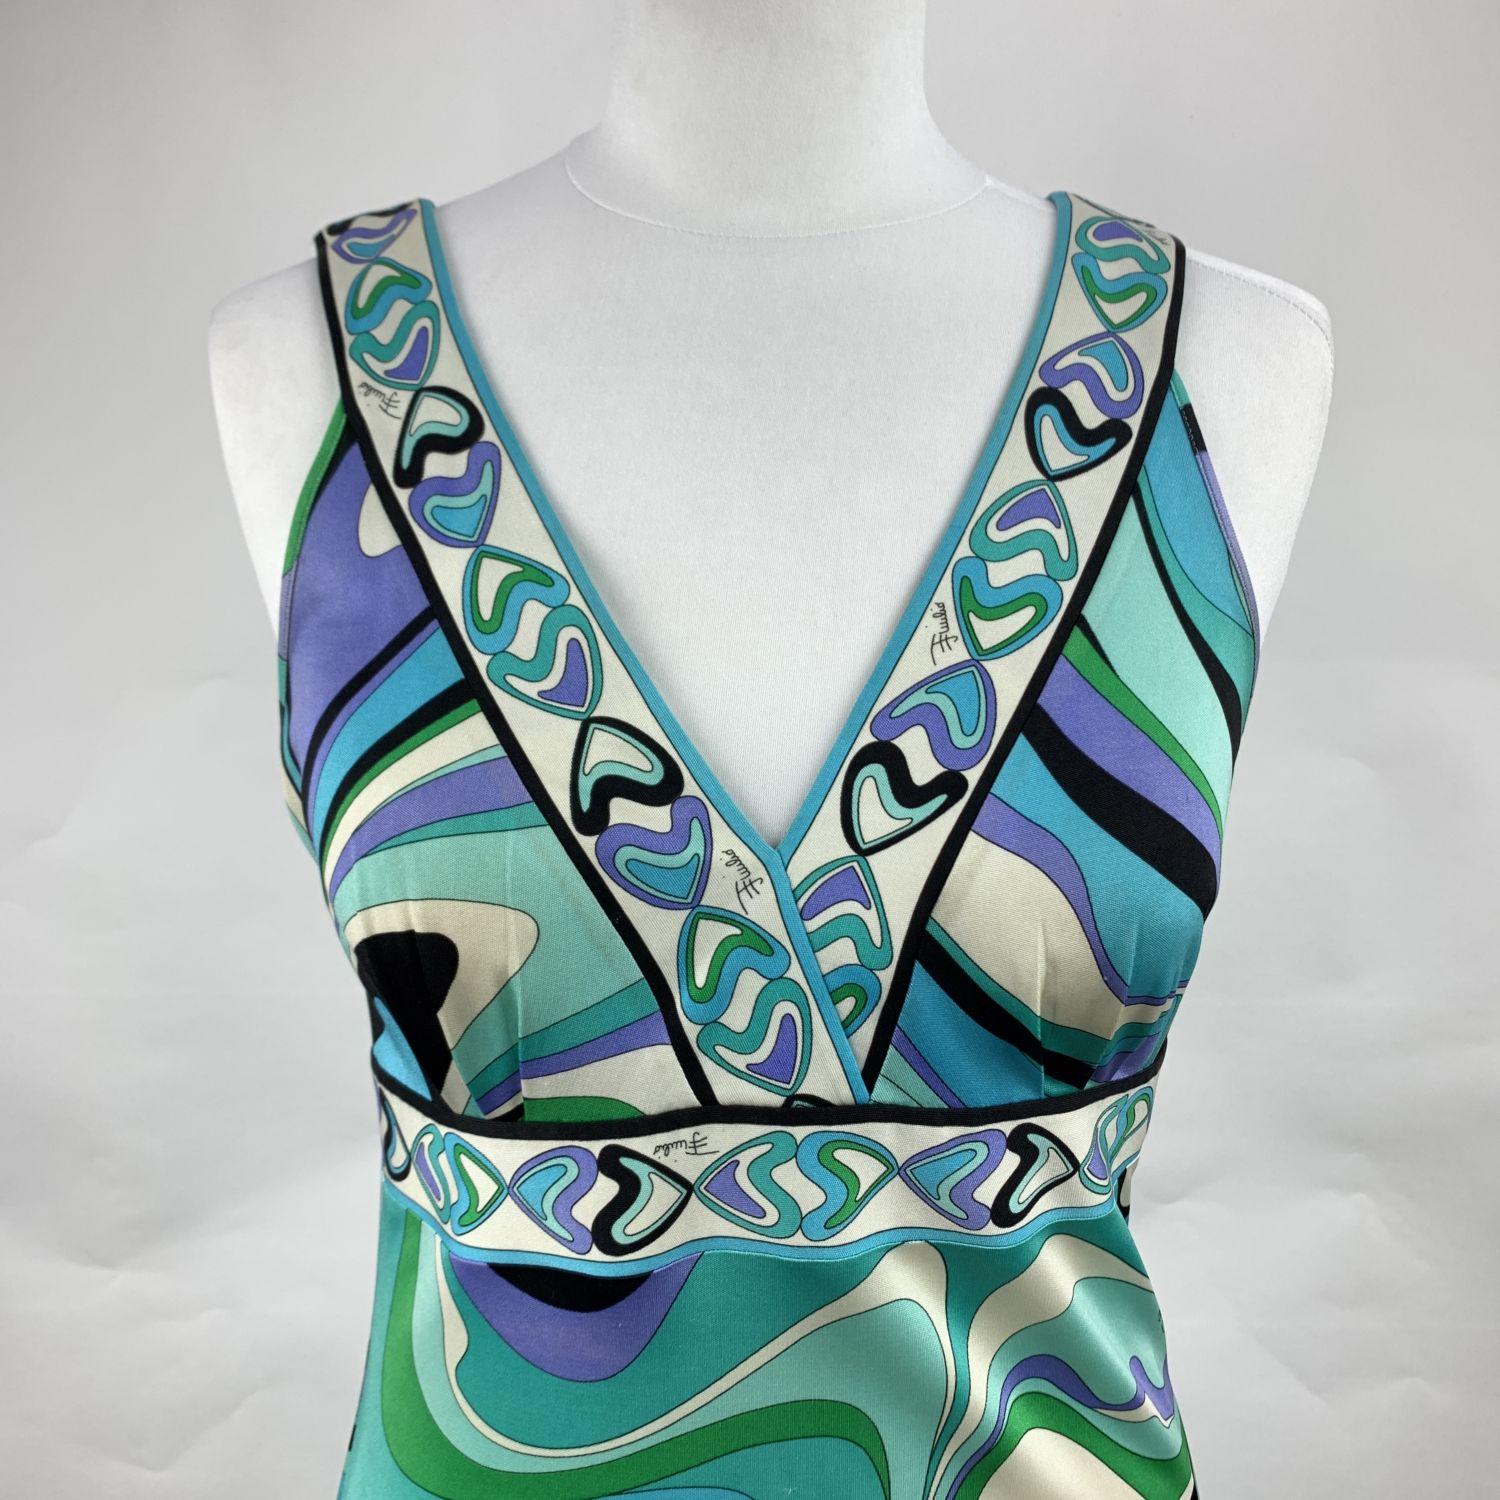 Beautiful Emilio Pucci sleeveless dress. Iconic print in turquoise colorway. The dress is made of a lightweight silk jersey. V-neckline. Composition: 100% Silk. Unlined. Size:  42 IT, 38 F, 8 USA, 10 UK, 38 D (The size shown for this item is the